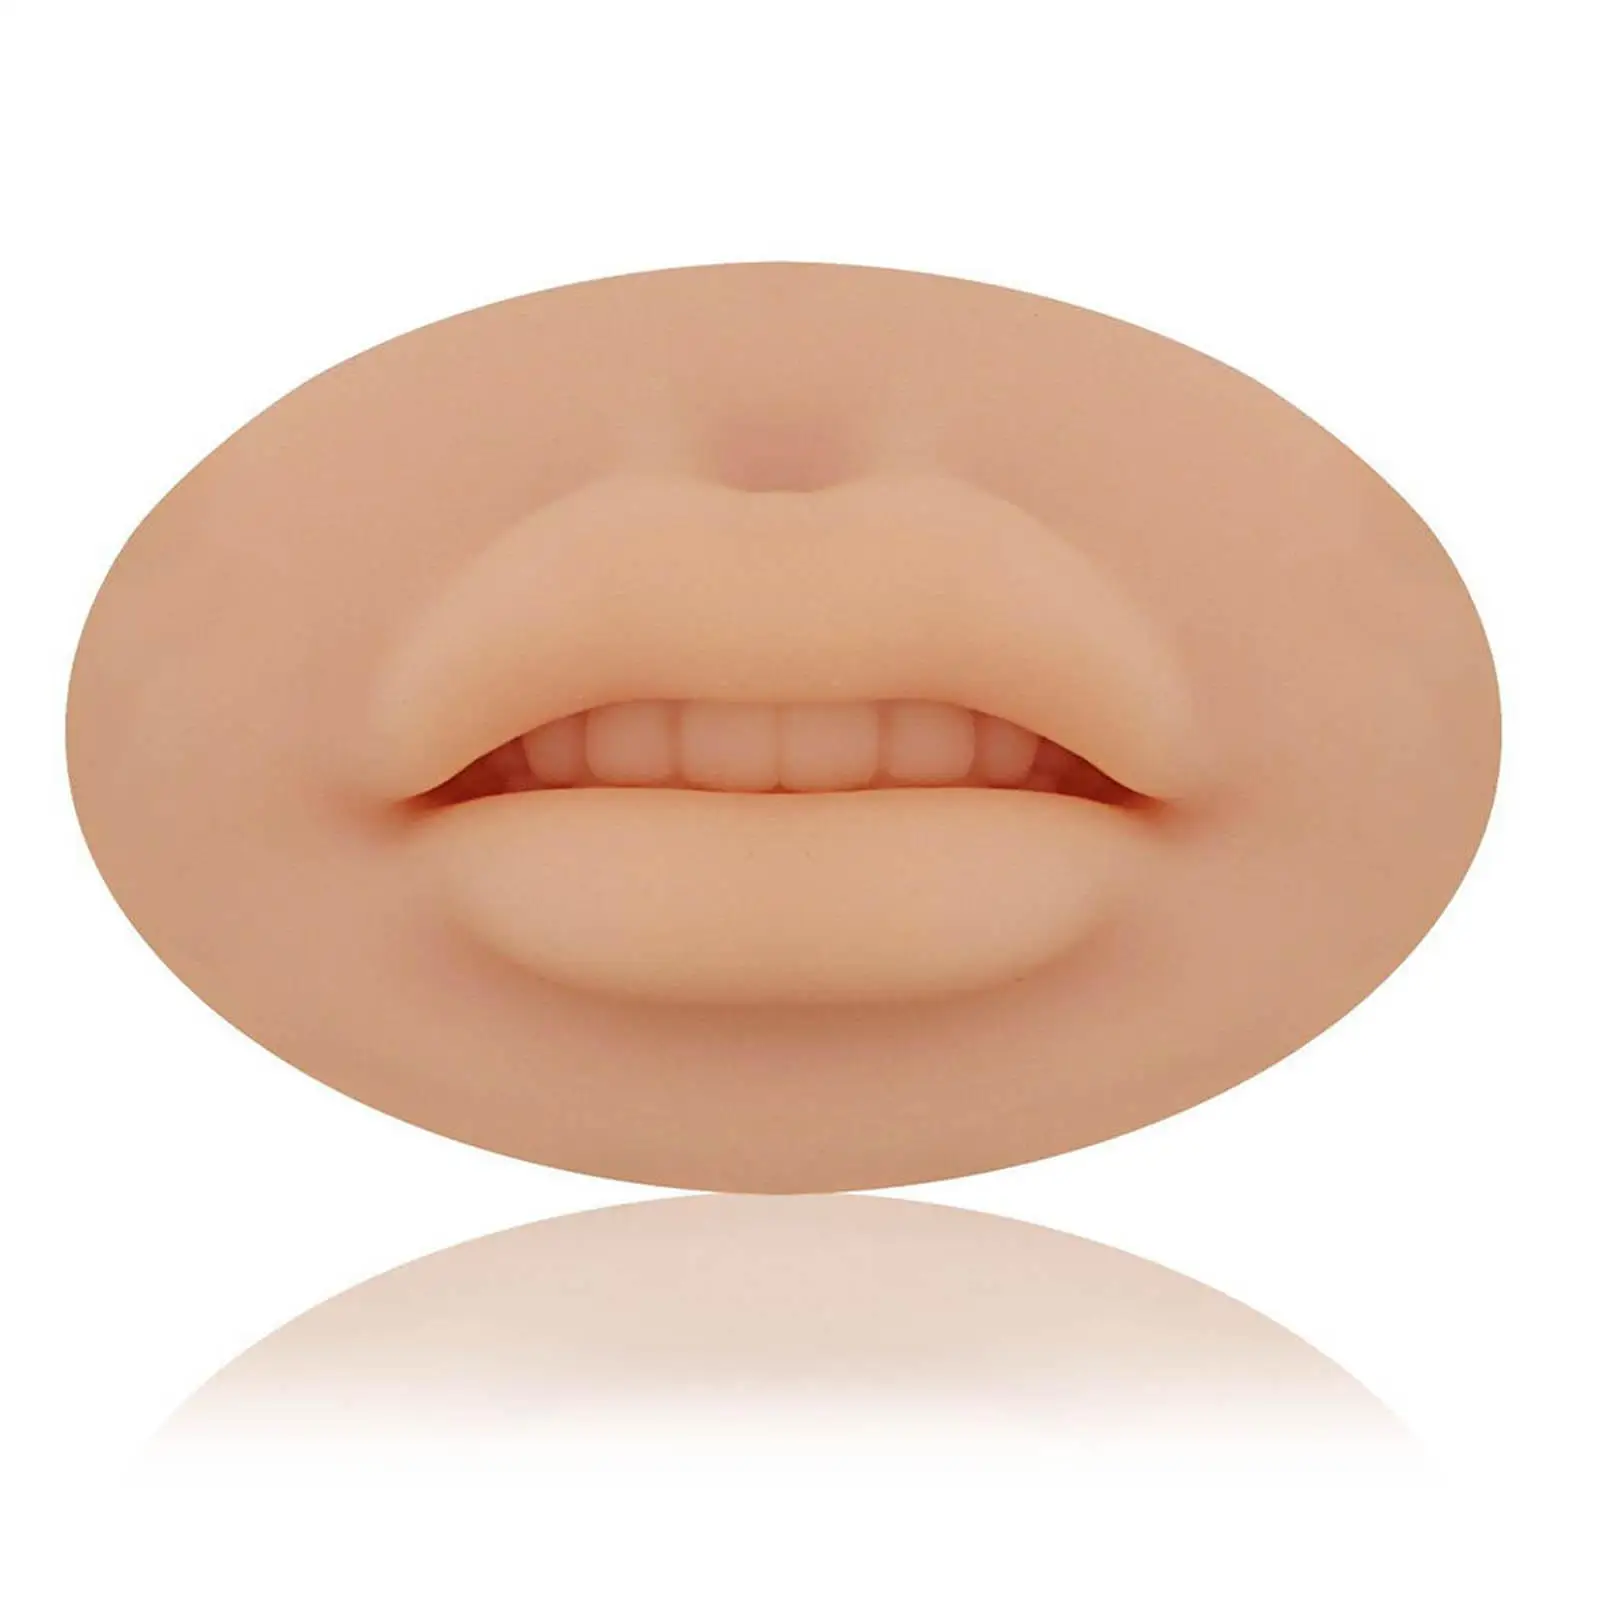 Silicone Lip Model Permanent Makeup 3D Training Lip Practice Waterproof Fake Skin Tattoo Tattoo Skin Practice for Soft Feeling